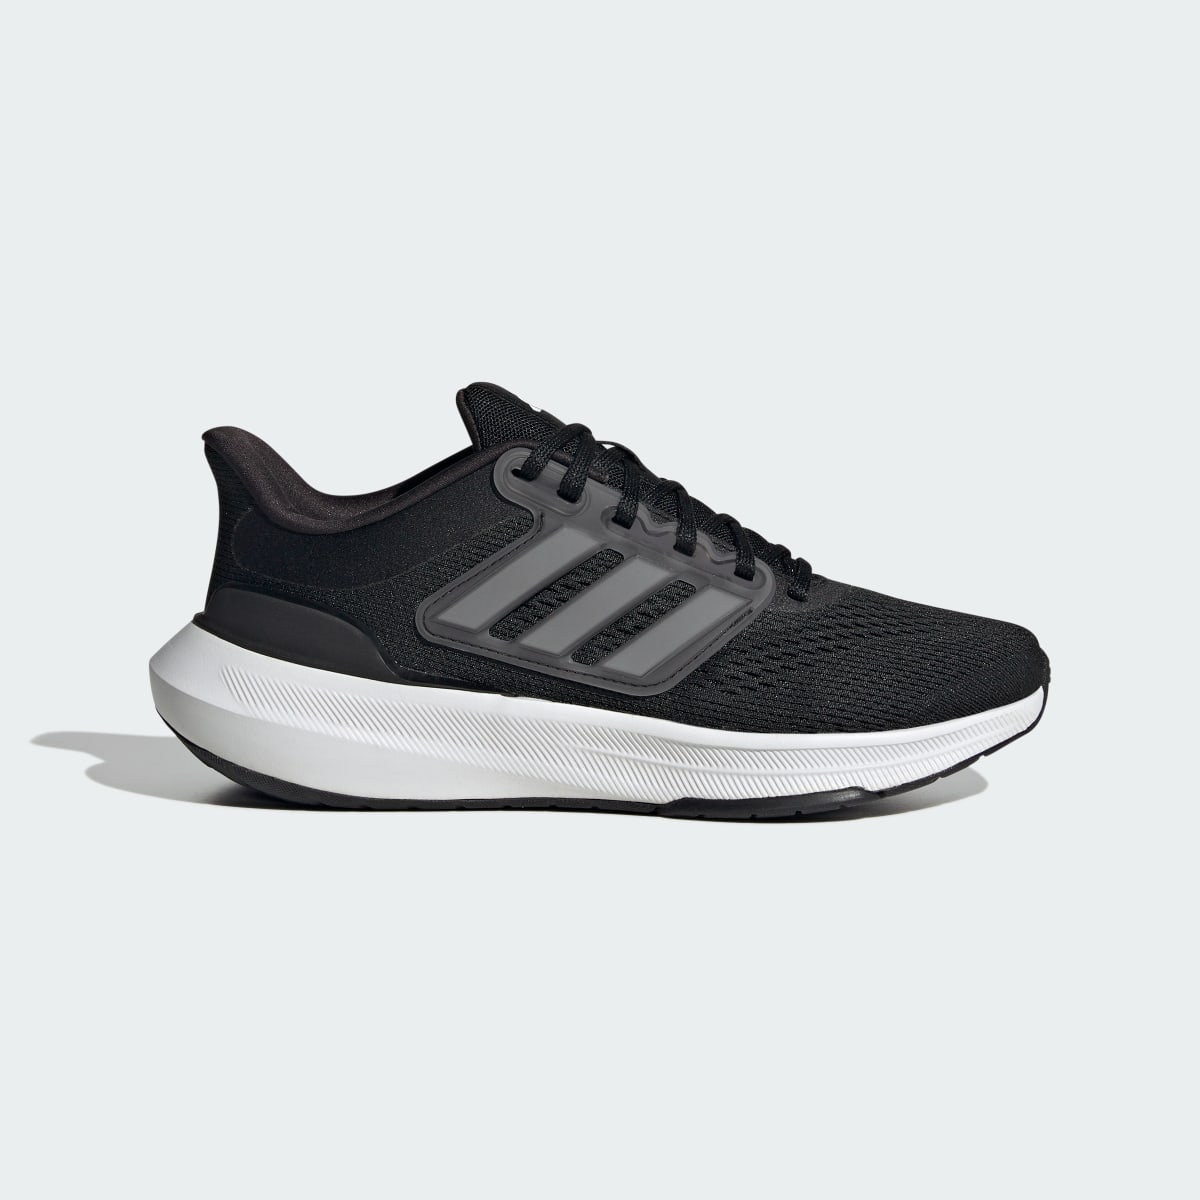 Adidas Ultrabounce Wide Shoes. 4